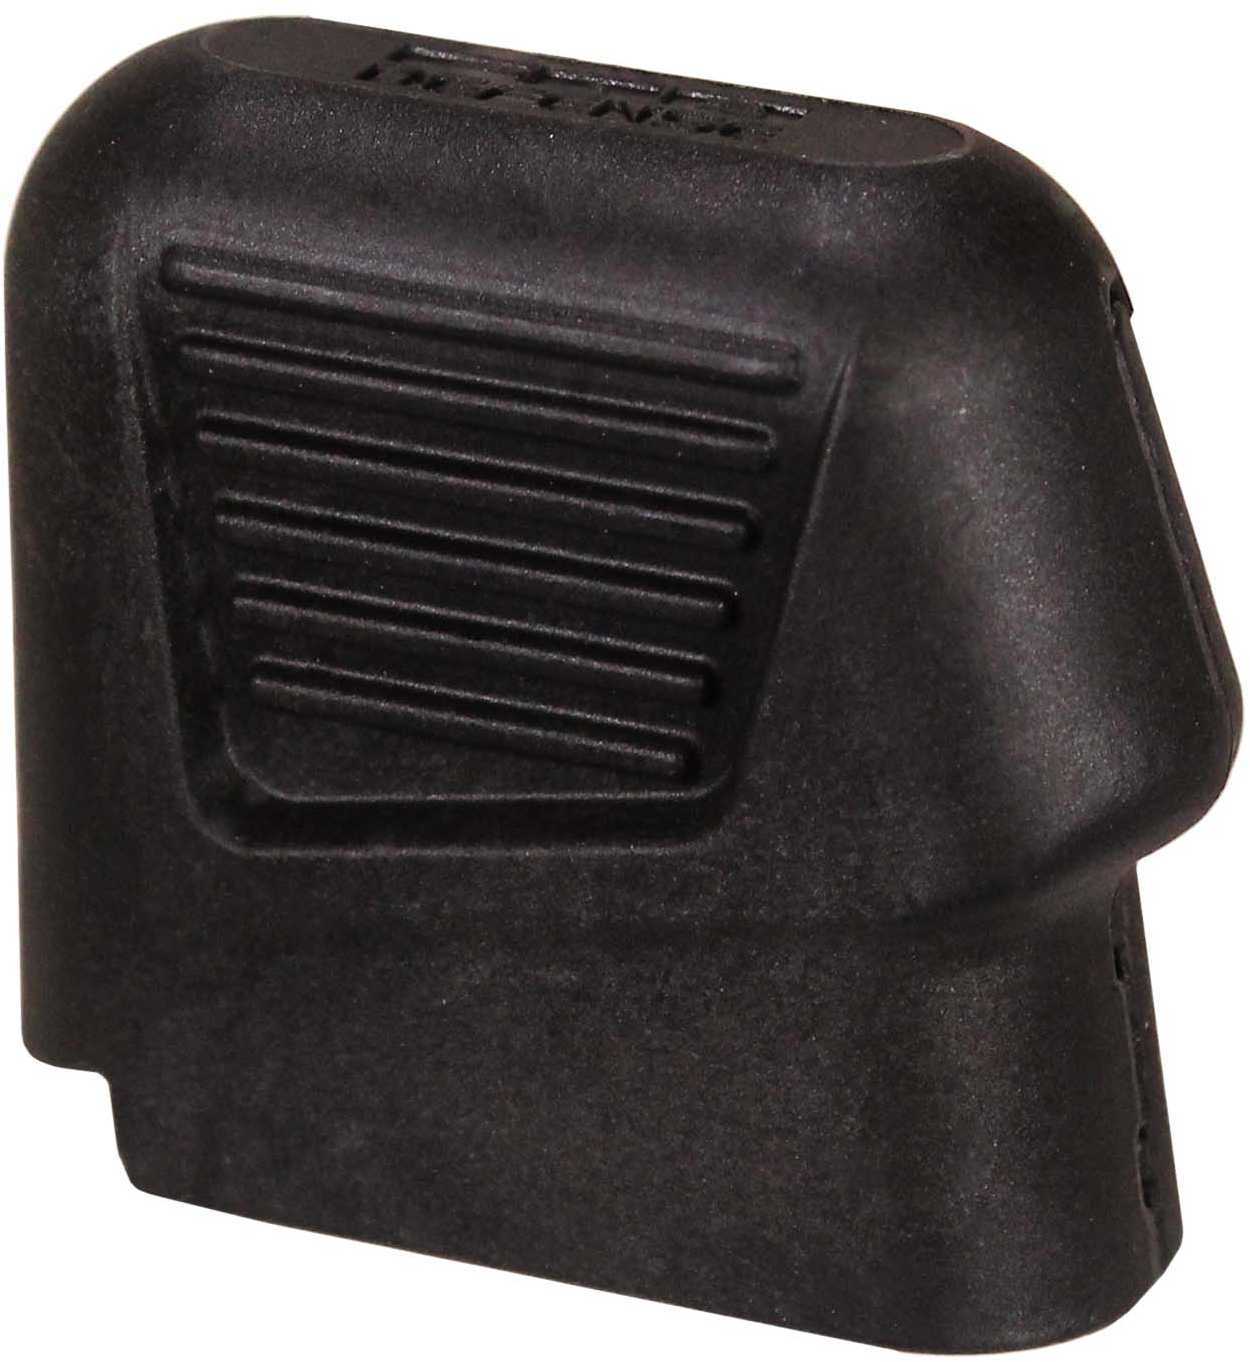 MAKO 4RD MAG EXT FOR GLOCK 43 BLK